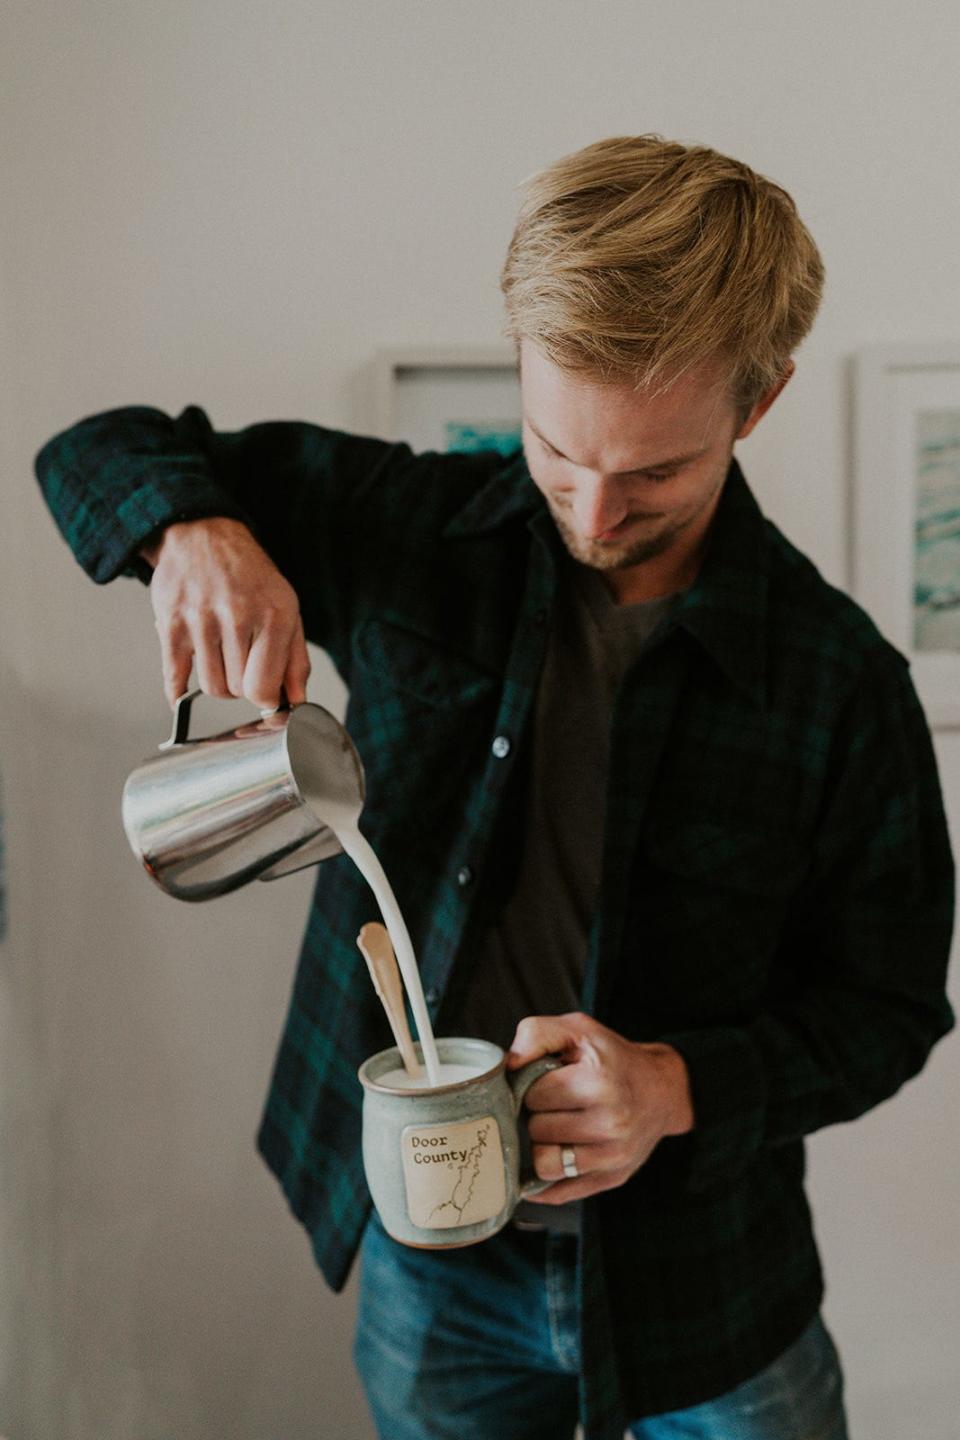 Cole VanderLeest pours hot milk over a hot chocolate spoon, a coated wooden spoon that makes hot chocolate when the milk is added.